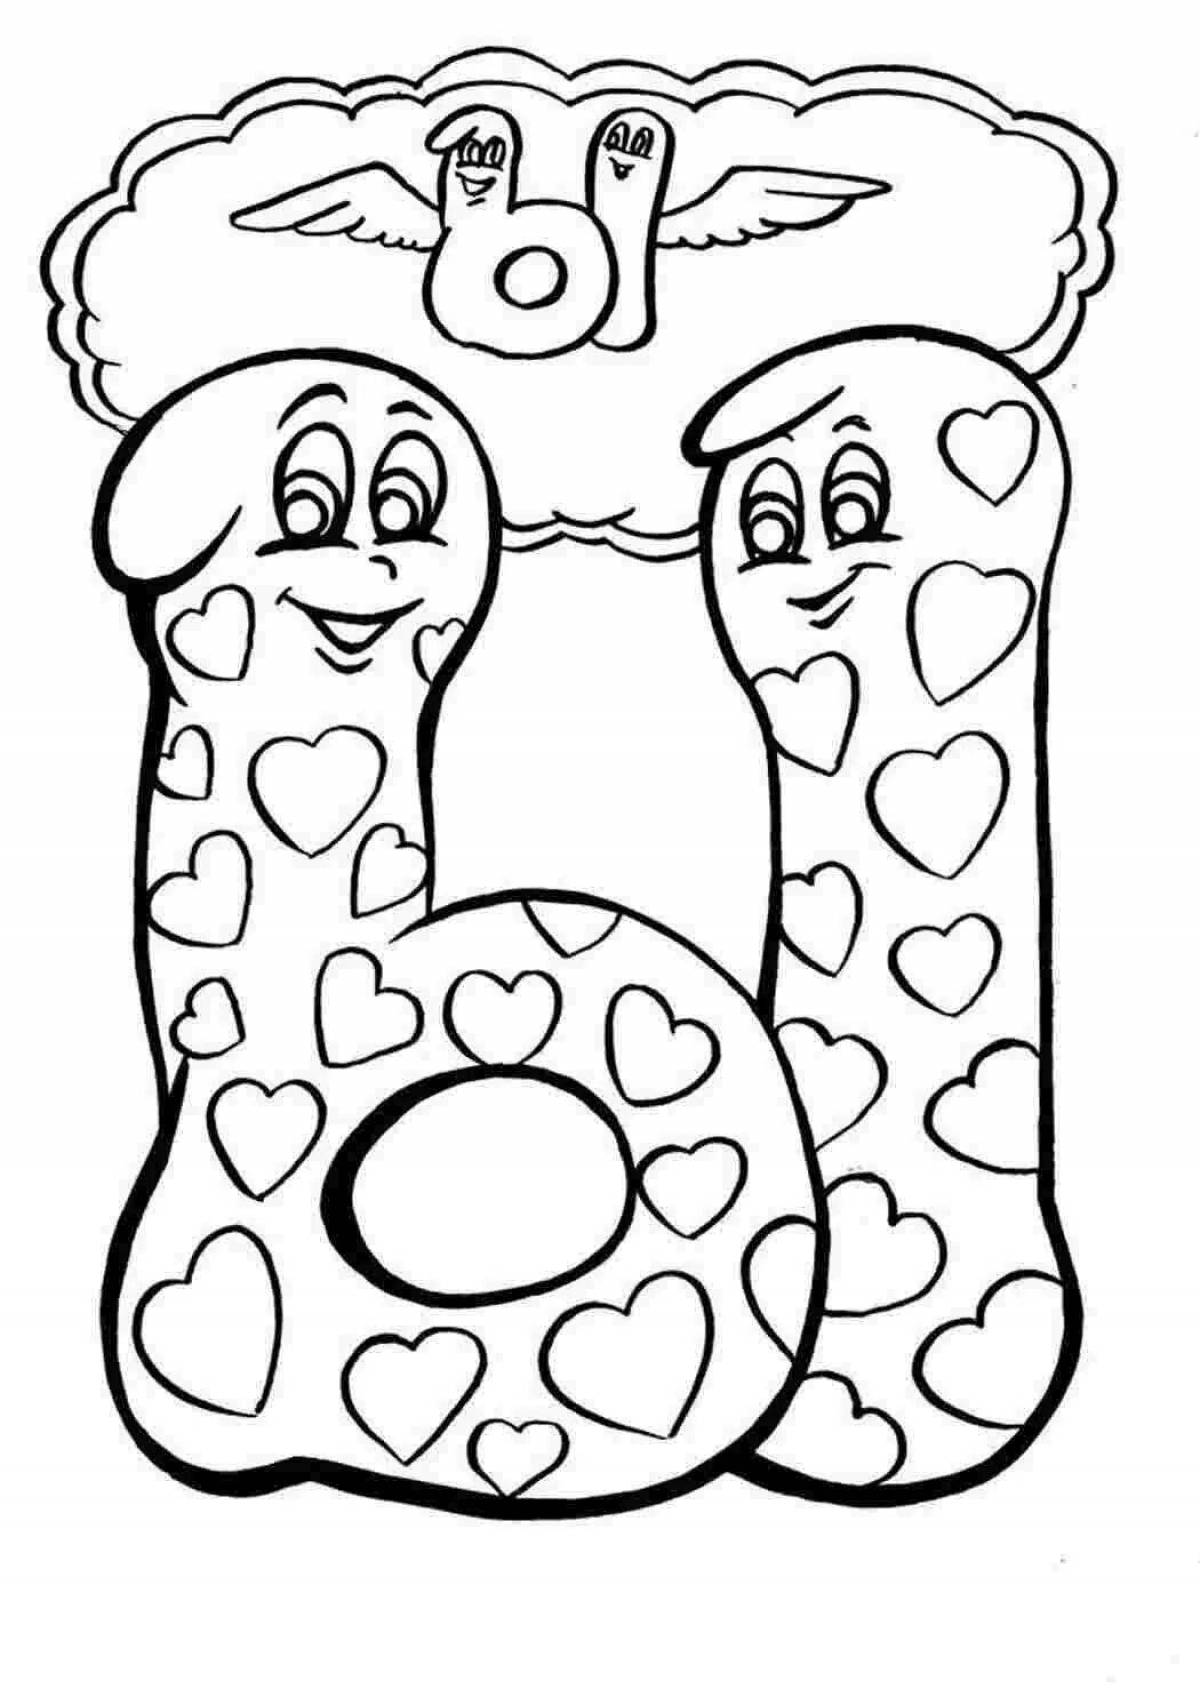 Colorific coloring page funny letters